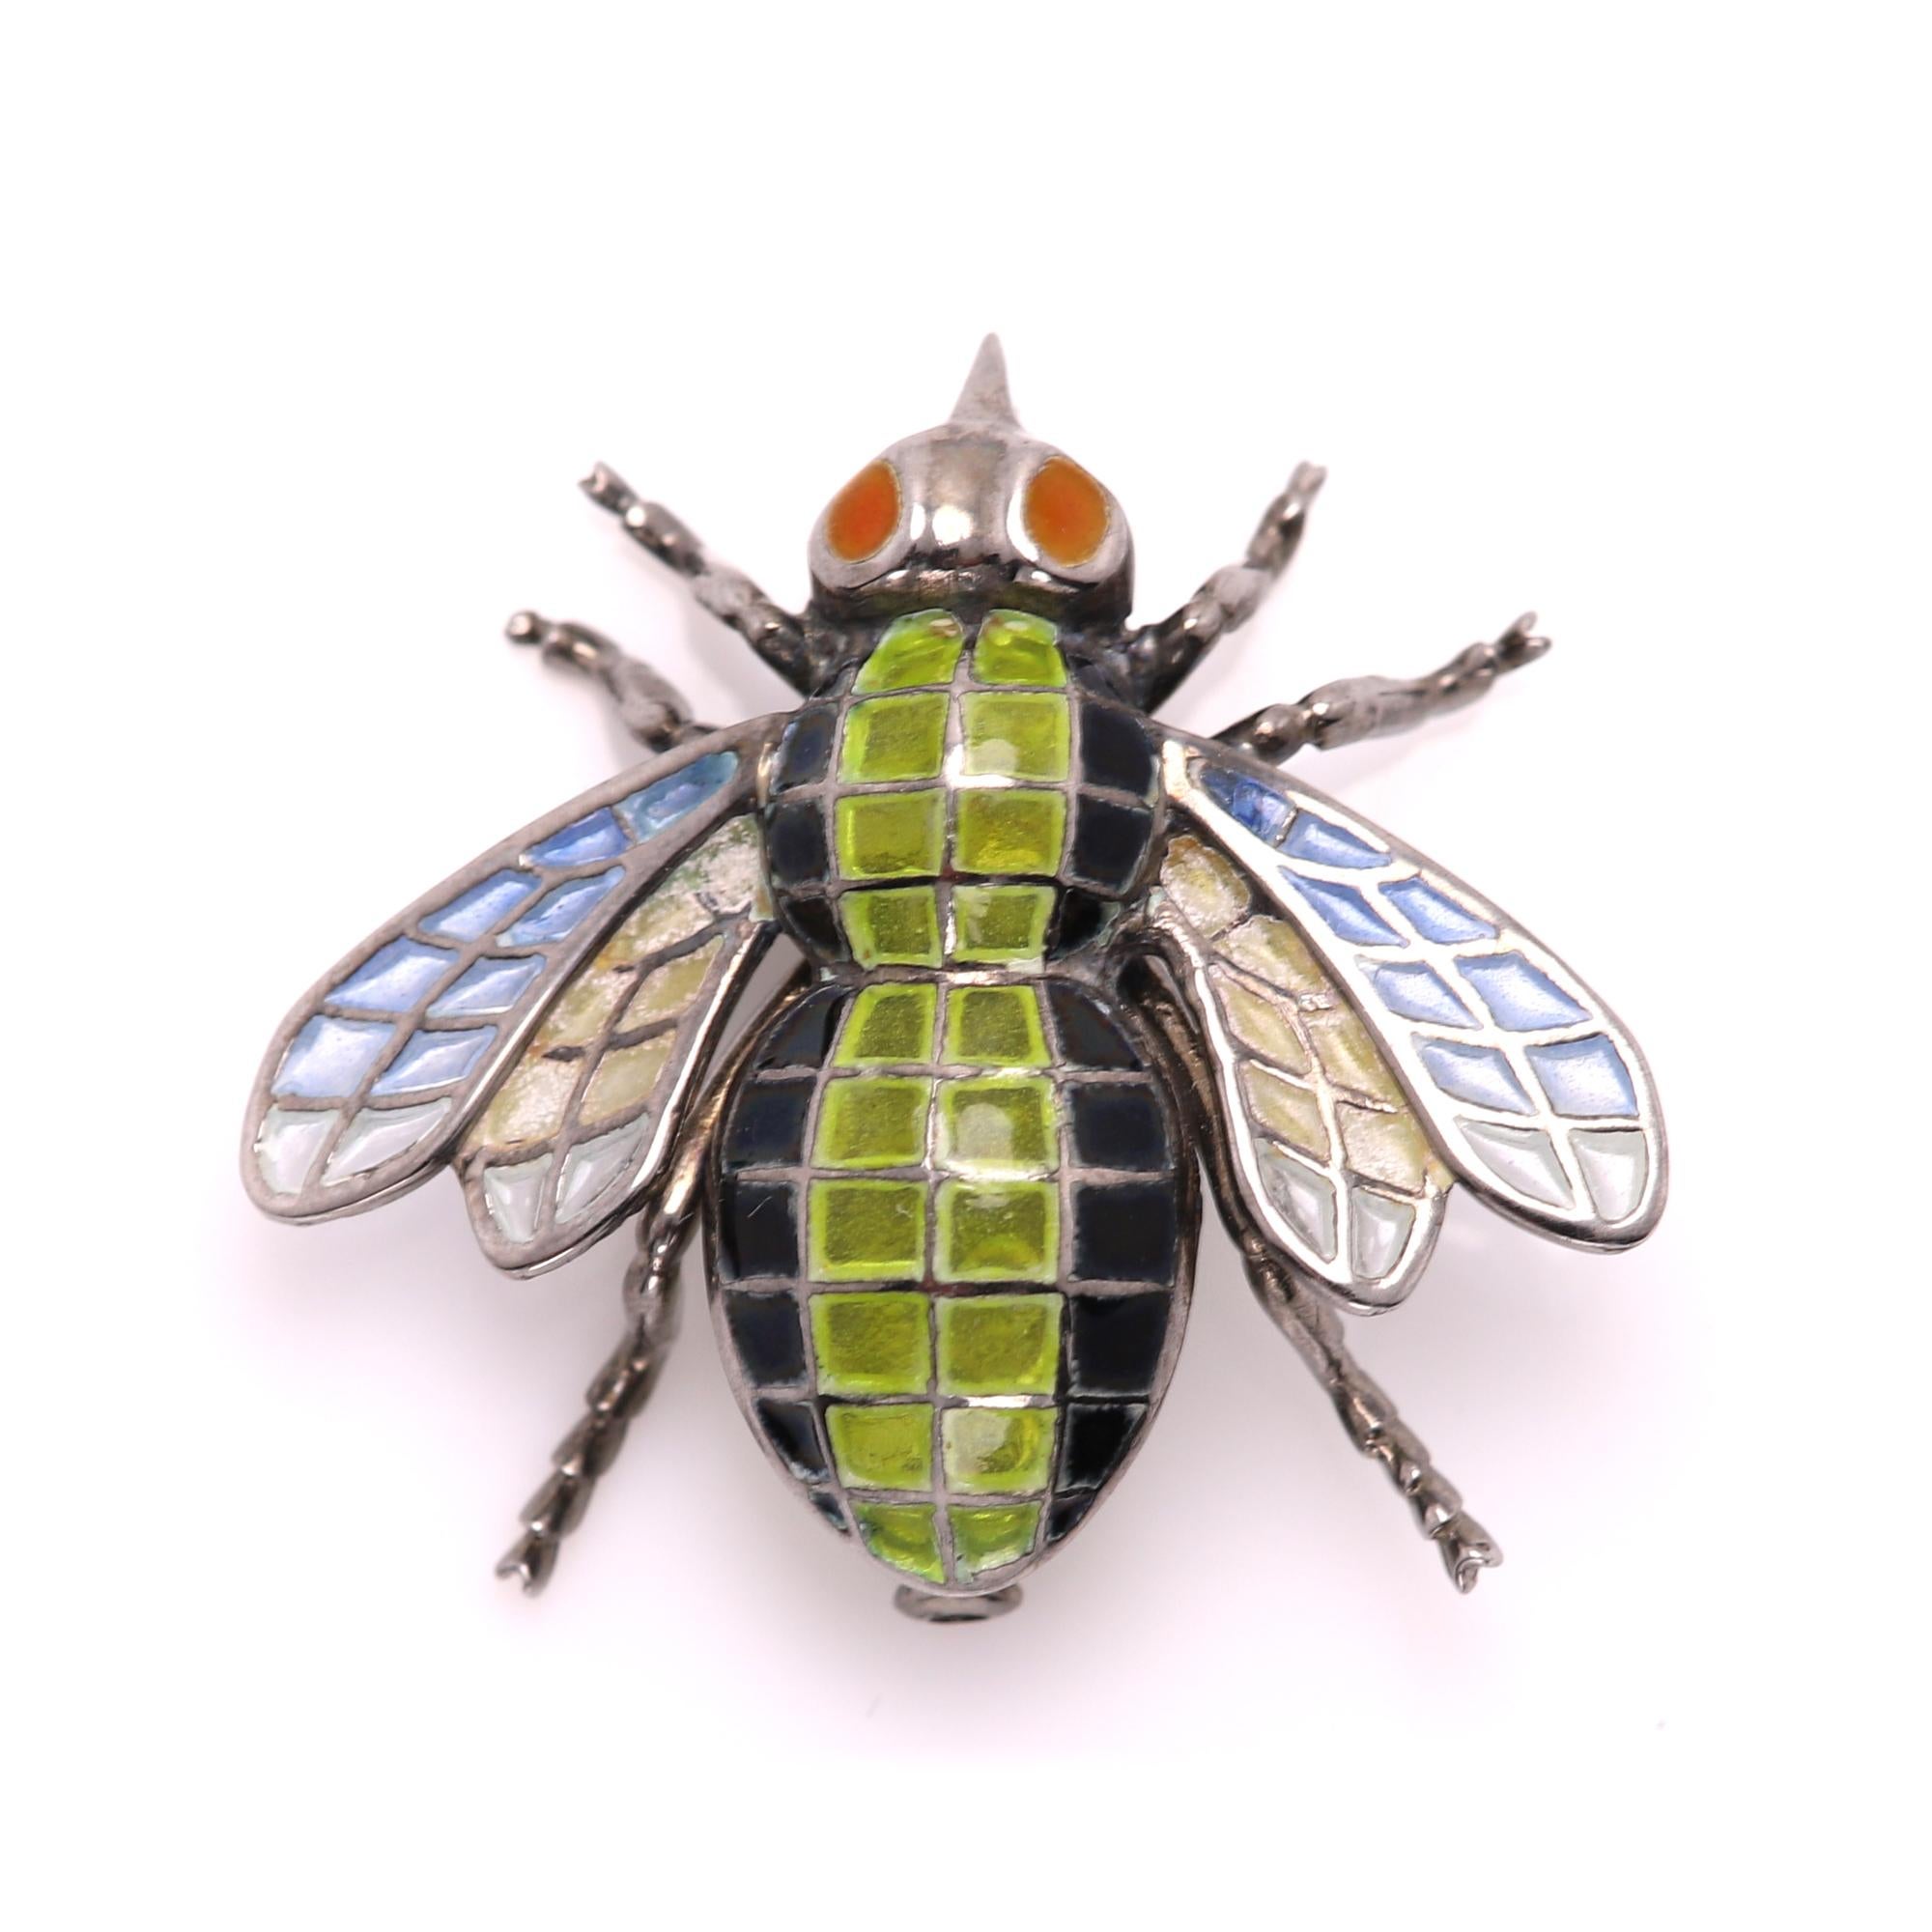 Vintage But never used
Sterling silver 925 (oxidized)
Enamel Fly
Pendant and Pin 
Green & Black Colors
Weight : 6.90 Grams
Size: approx 30 mm (1.25' inch)
Hand made In Spain around 2006 
+Gift Box